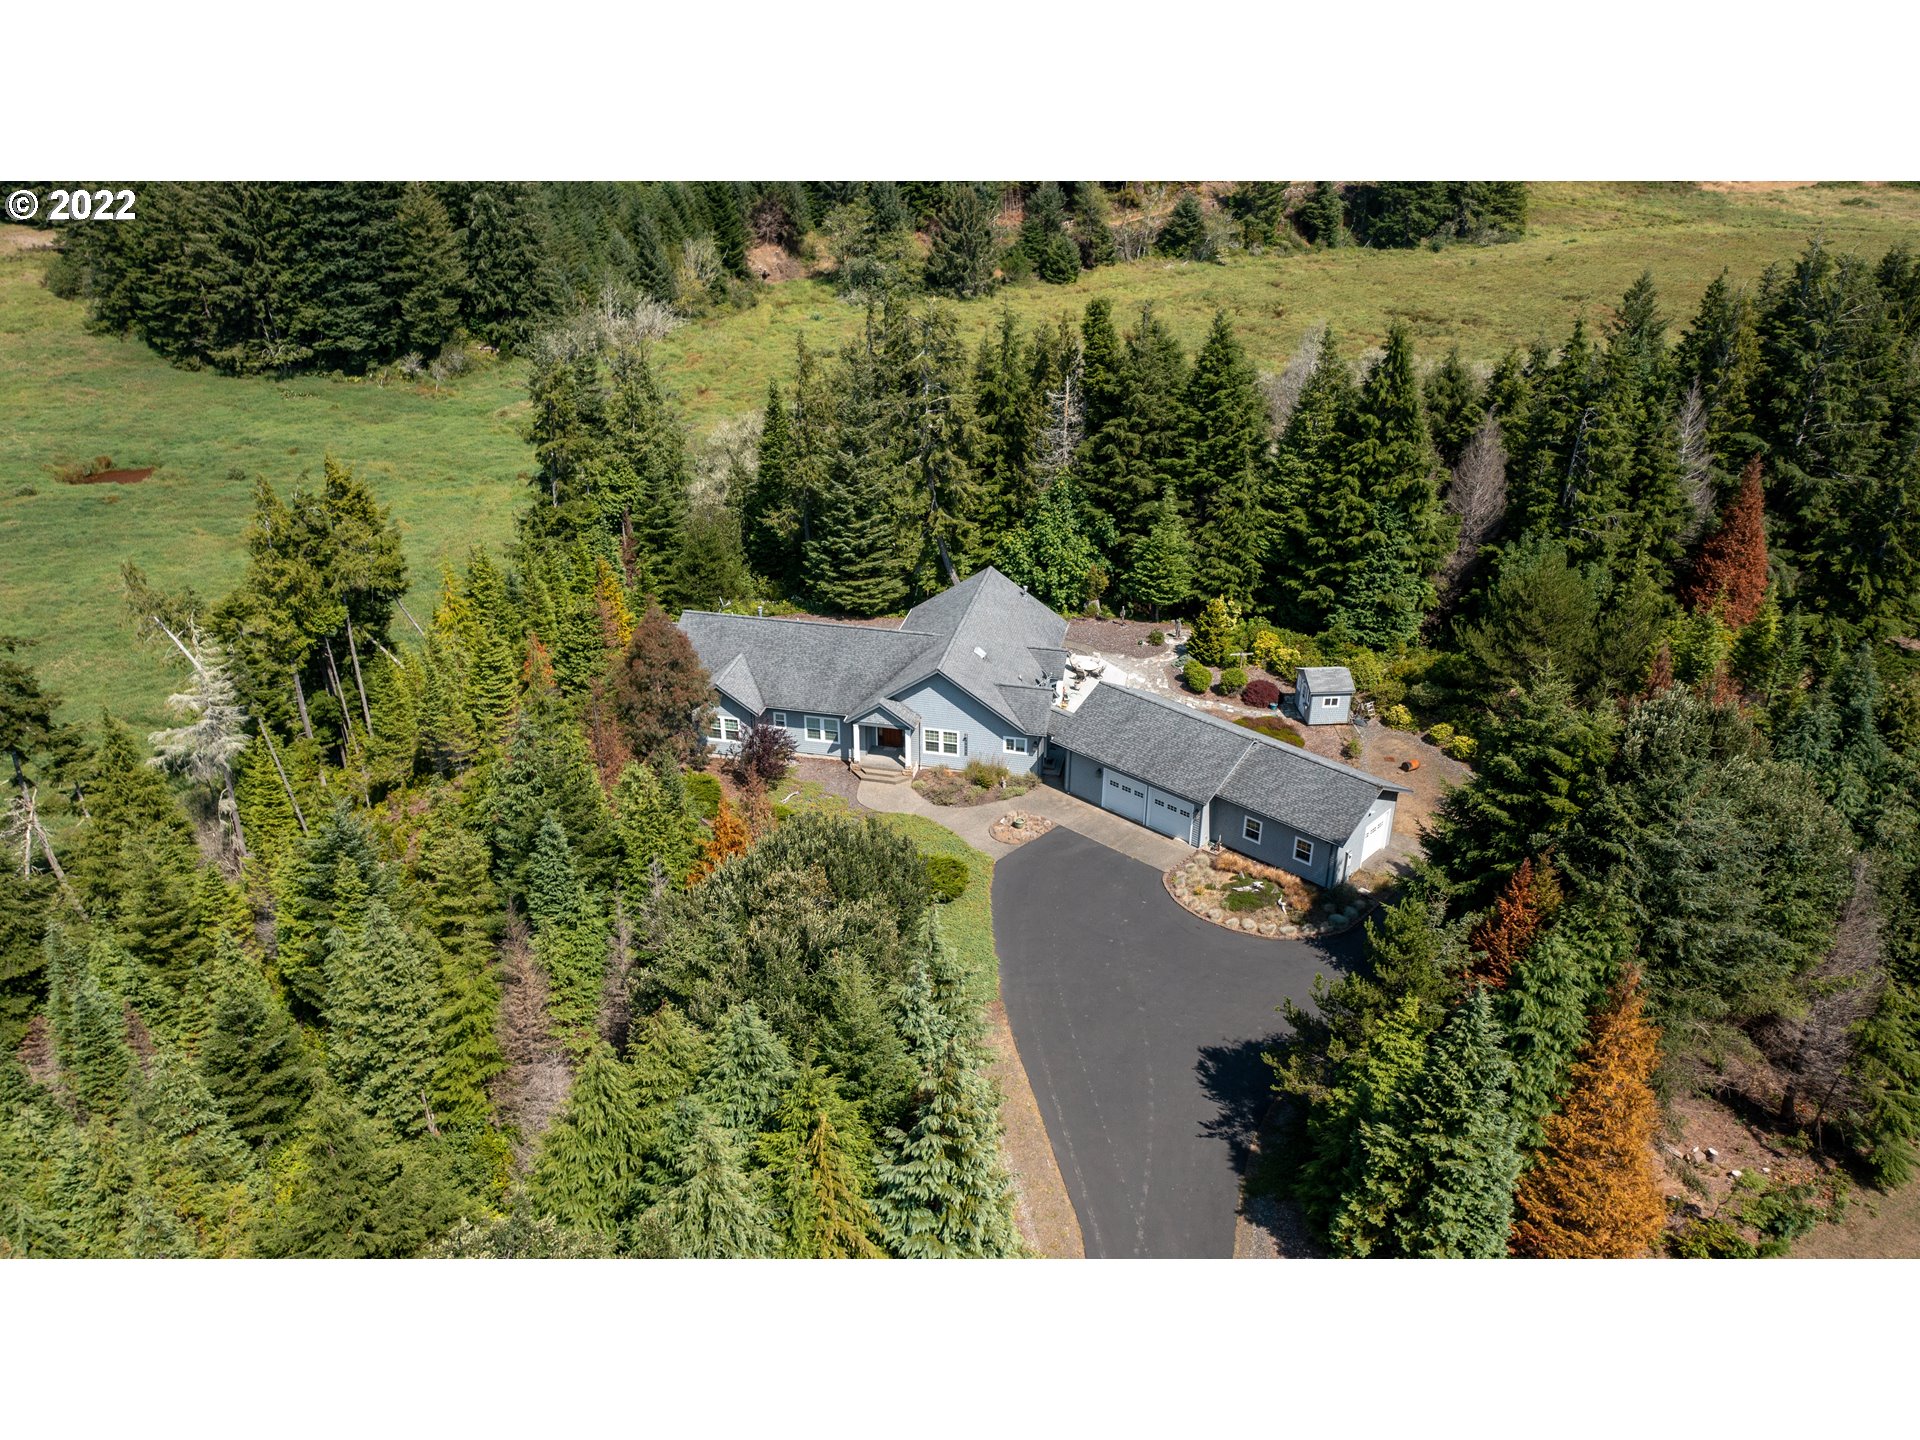 69245 SANDPOINT RD, North Bend, OR 97459